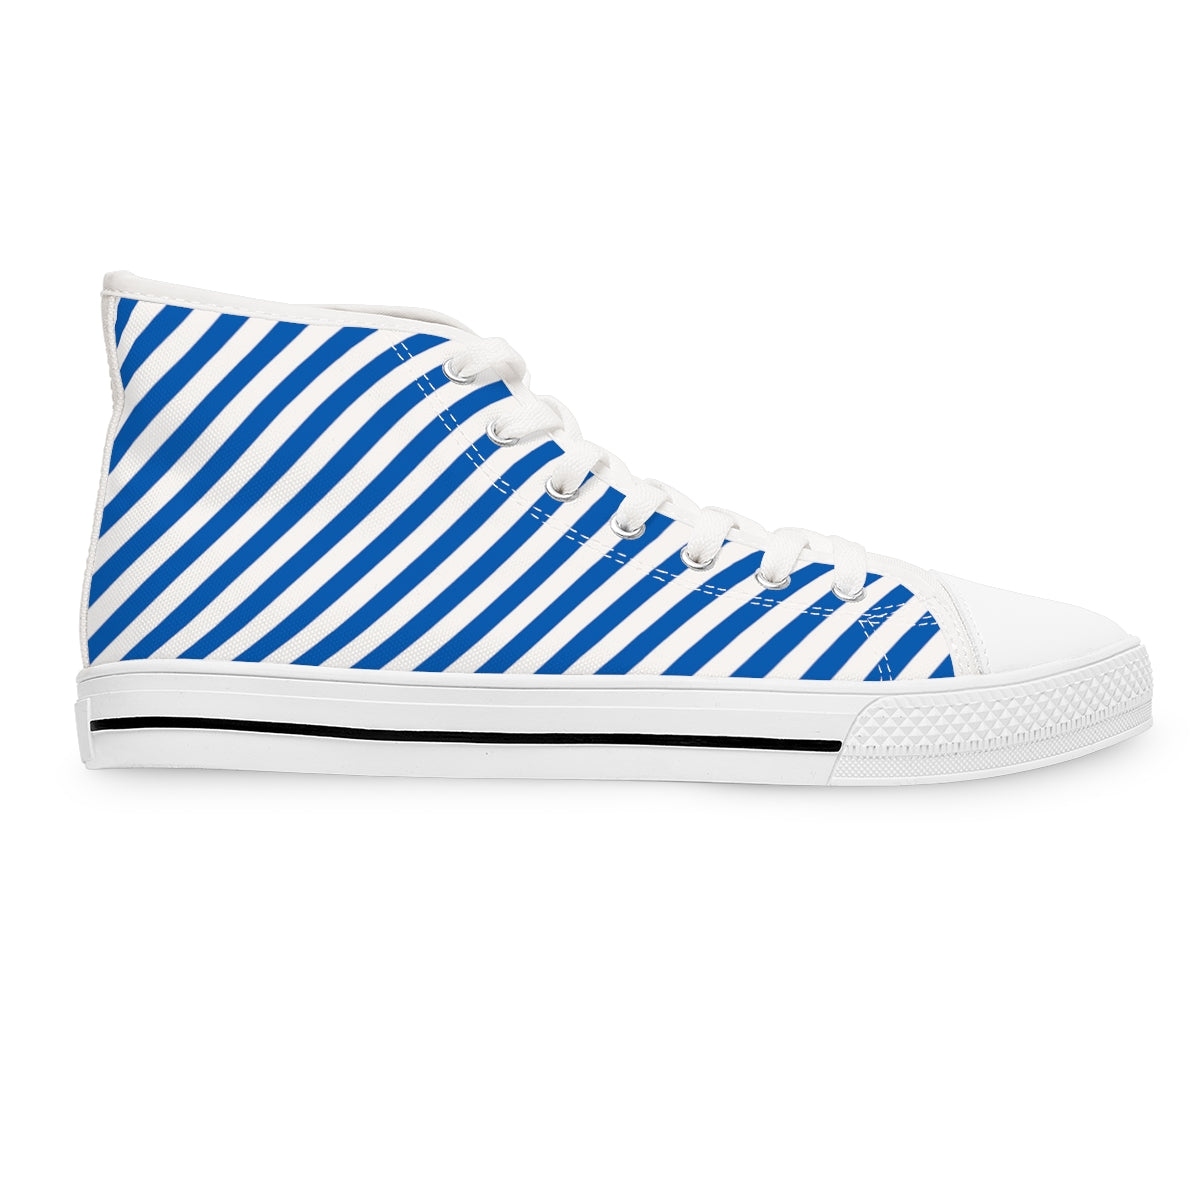 Women's Striped High Top Sneakers right